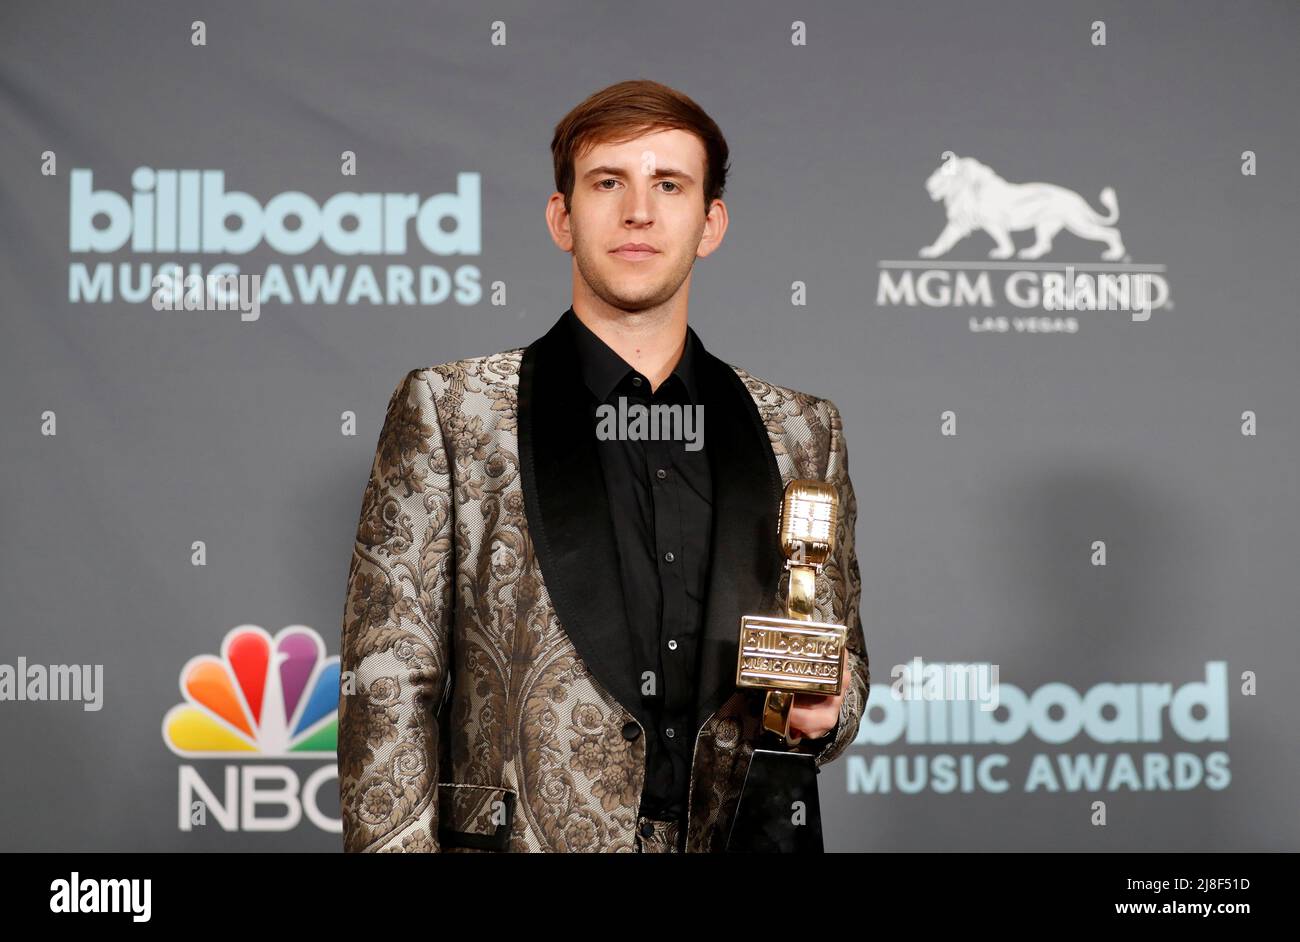 Illenium poses with award for Top Dance/Electric Album in the photo room during the Billboard Music Awards in Las Vegas, Nevada U.S. May 15, 2022. REUTERS/Steve Marcus Stock Photo